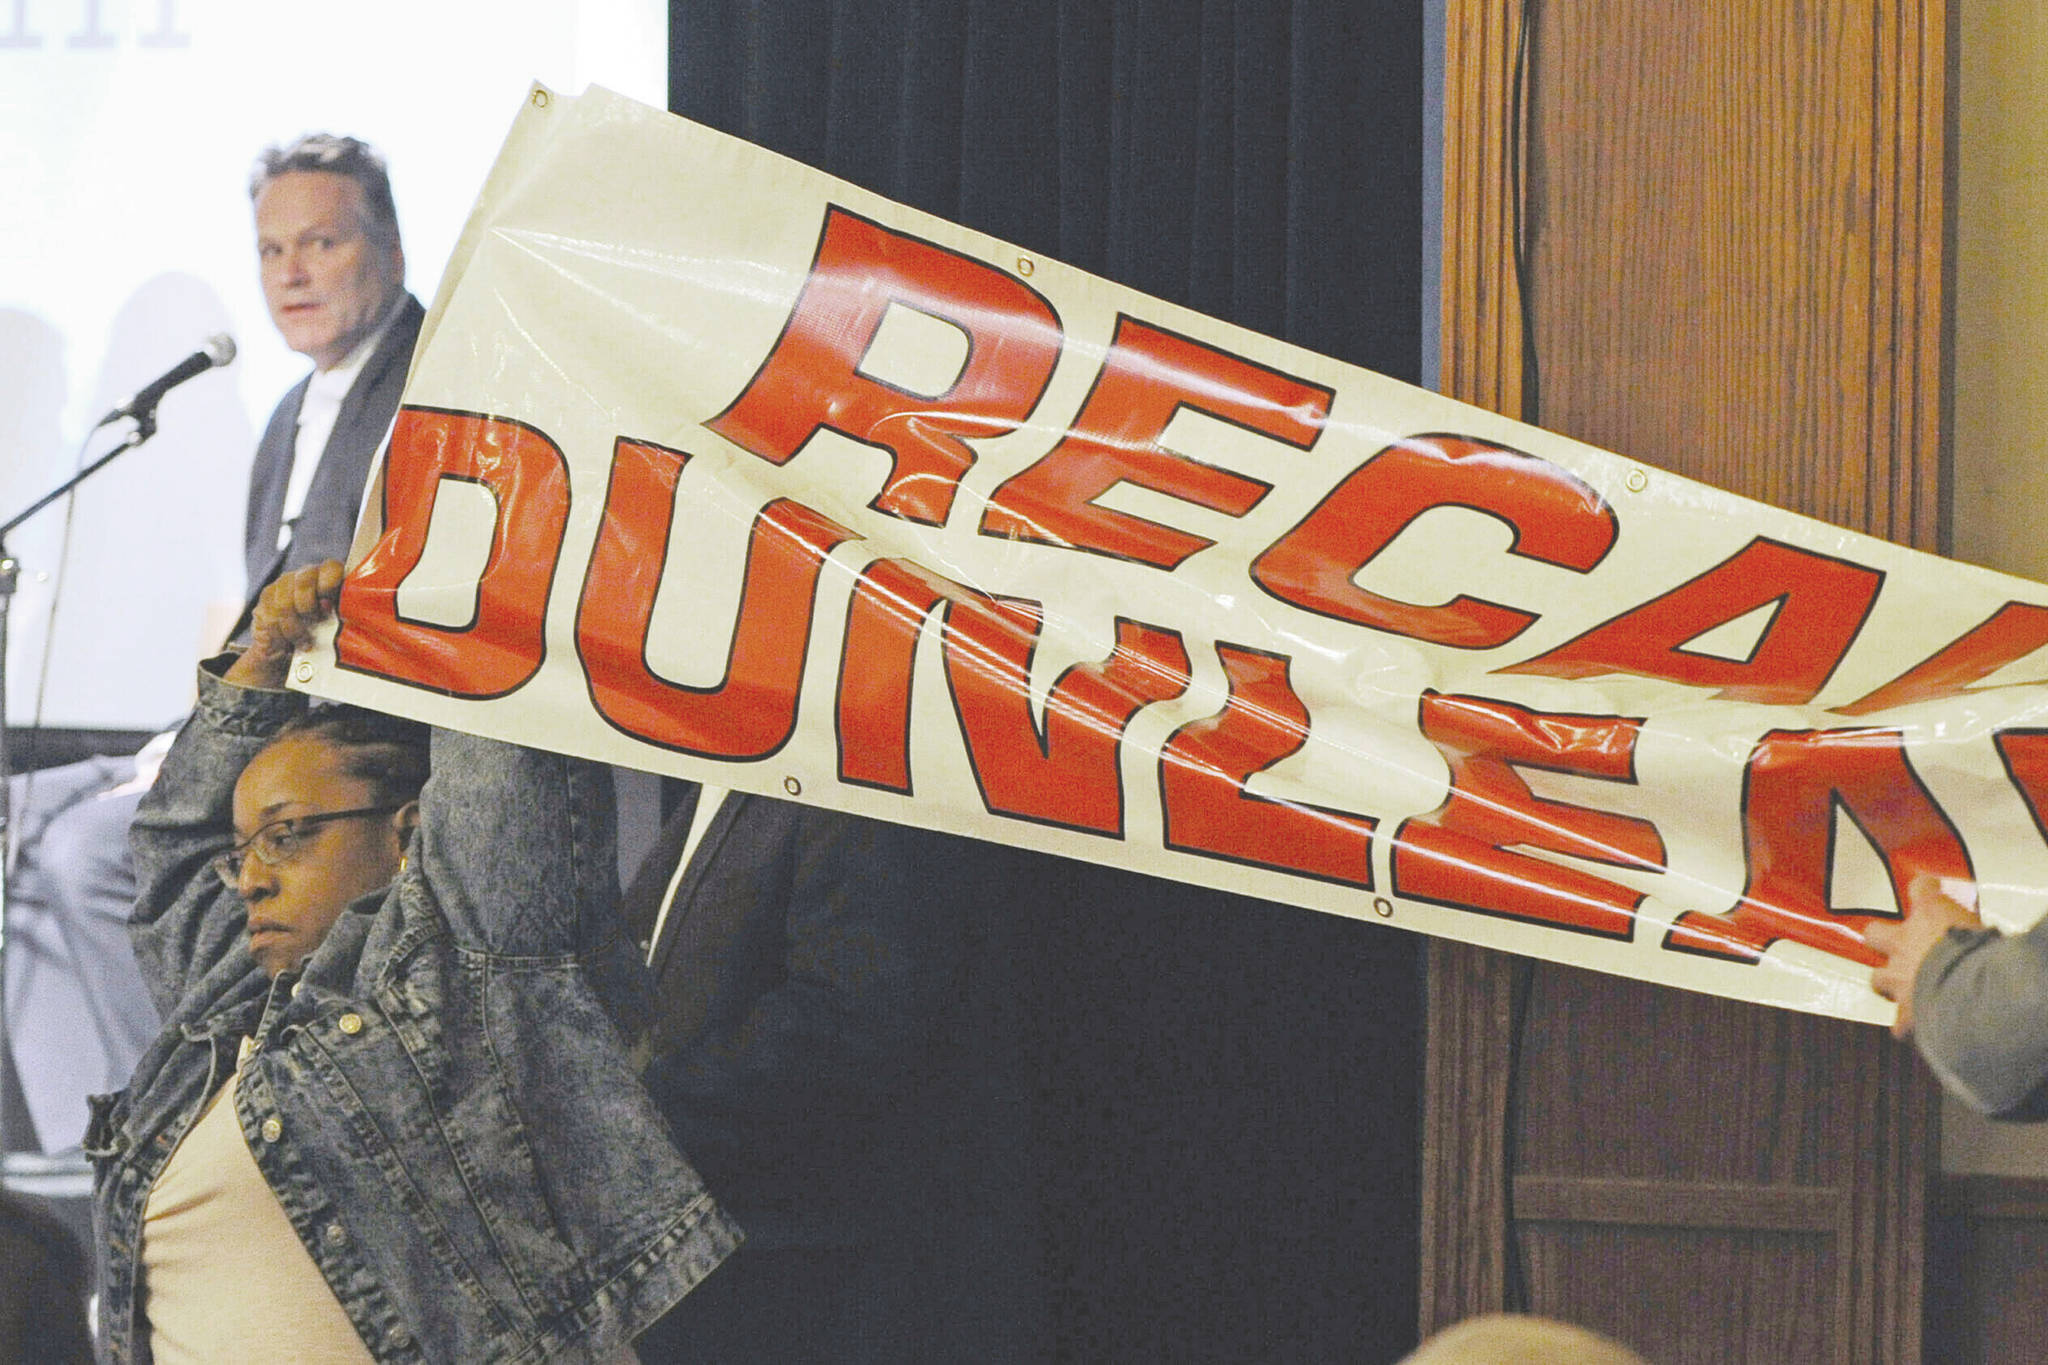 FILE - In this March 26, 2019, file photo, protestors unfurl a "Recall Dunleavy" banner as Gov. Mike Dunleavy, upper left, speaks during a roadshow with Americans for Prosperity in 49th State Brewing Company in Anchorage, Alaska. Dunleavy said he hopes to move past the rancor of his first year in office, amid an unsettled dispute with lawmakers over state spending and threat of a recall effort looming large. The Republican will mark a full year in office Tuesday, Dec. 3. (Bill Roth/Anchorage Daily News via AP, File)